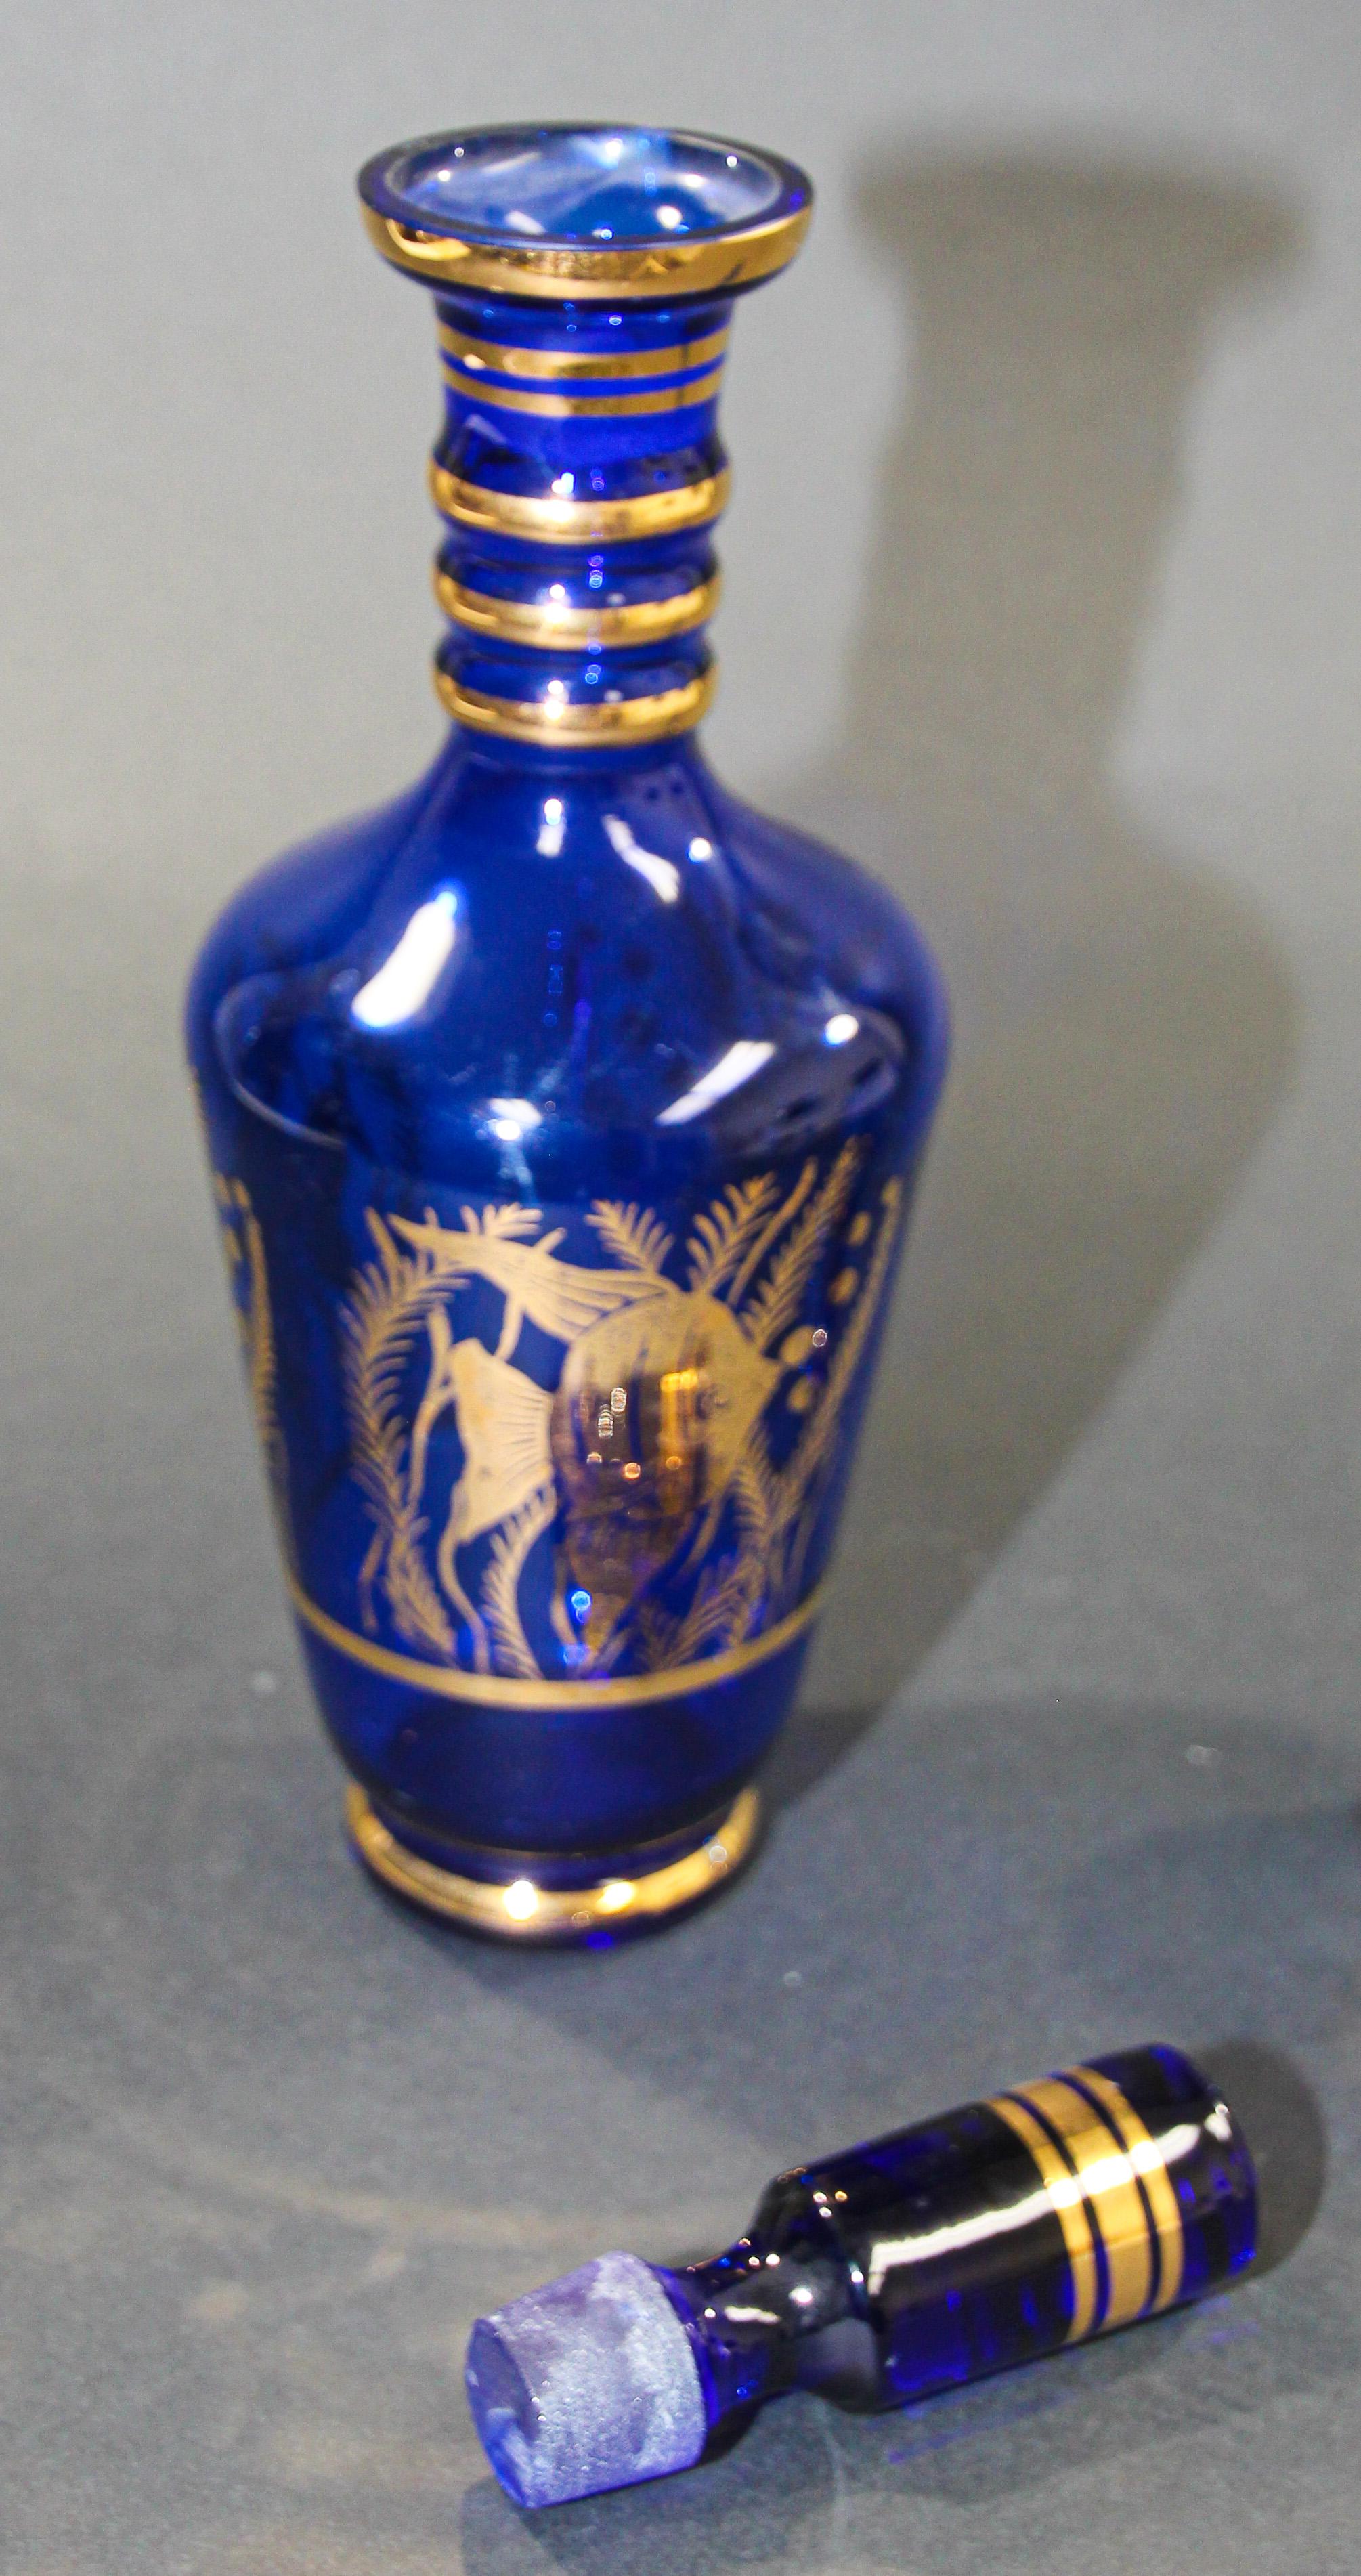 Cobalt Blue Enameled Glass Liquor Set Decanter and Glasses In Good Condition For Sale In North Hollywood, CA